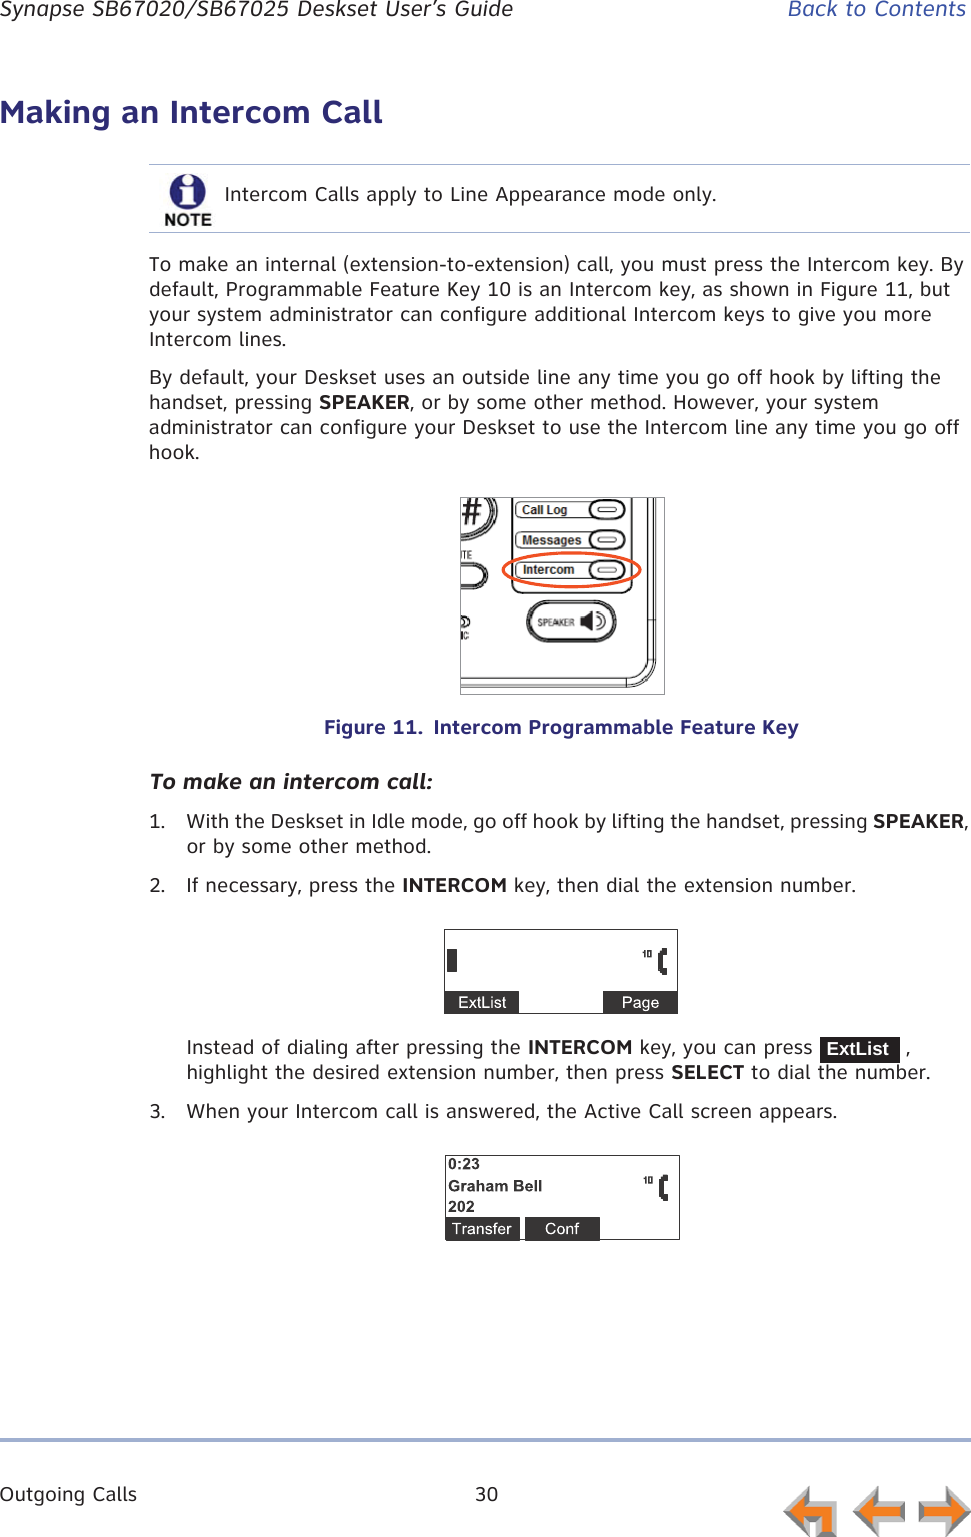 Outgoing Calls 30      Synapse SB67020/SB67025 Deskset User’s Guide Back to ContentsMaking an Intercom CallTo make an internal (extension-to-extension) call, you must press the Intercom key. By default, Programmable Feature Key 10 is an Intercom key, as shown in Figure 11, but your system administrator can configure additional Intercom keys to give you more Intercom lines.By default, your Deskset uses an outside line any time you go off hook by lifting the handset, pressing SPEAKER, or by some other method. However, your system administrator can configure your Deskset to use the Intercom line any time you go off hook.Figure 11.  Intercom Programmable Feature KeyTo make an intercom call:1. With the Deskset in Idle mode, go off hook by lifting the handset, pressing SPEAKER, or by some other method.2. If necessary, press the INTERCOM key, then dial the extension number.Instead of dialing after pressing the INTERCOM key, you can press   , highlight the desired extension number, then press SELECT to dial the number.3. When your Intercom call is answered, the Active Call screen appears.Intercom Calls apply to Line Appearance mode only.ExtList